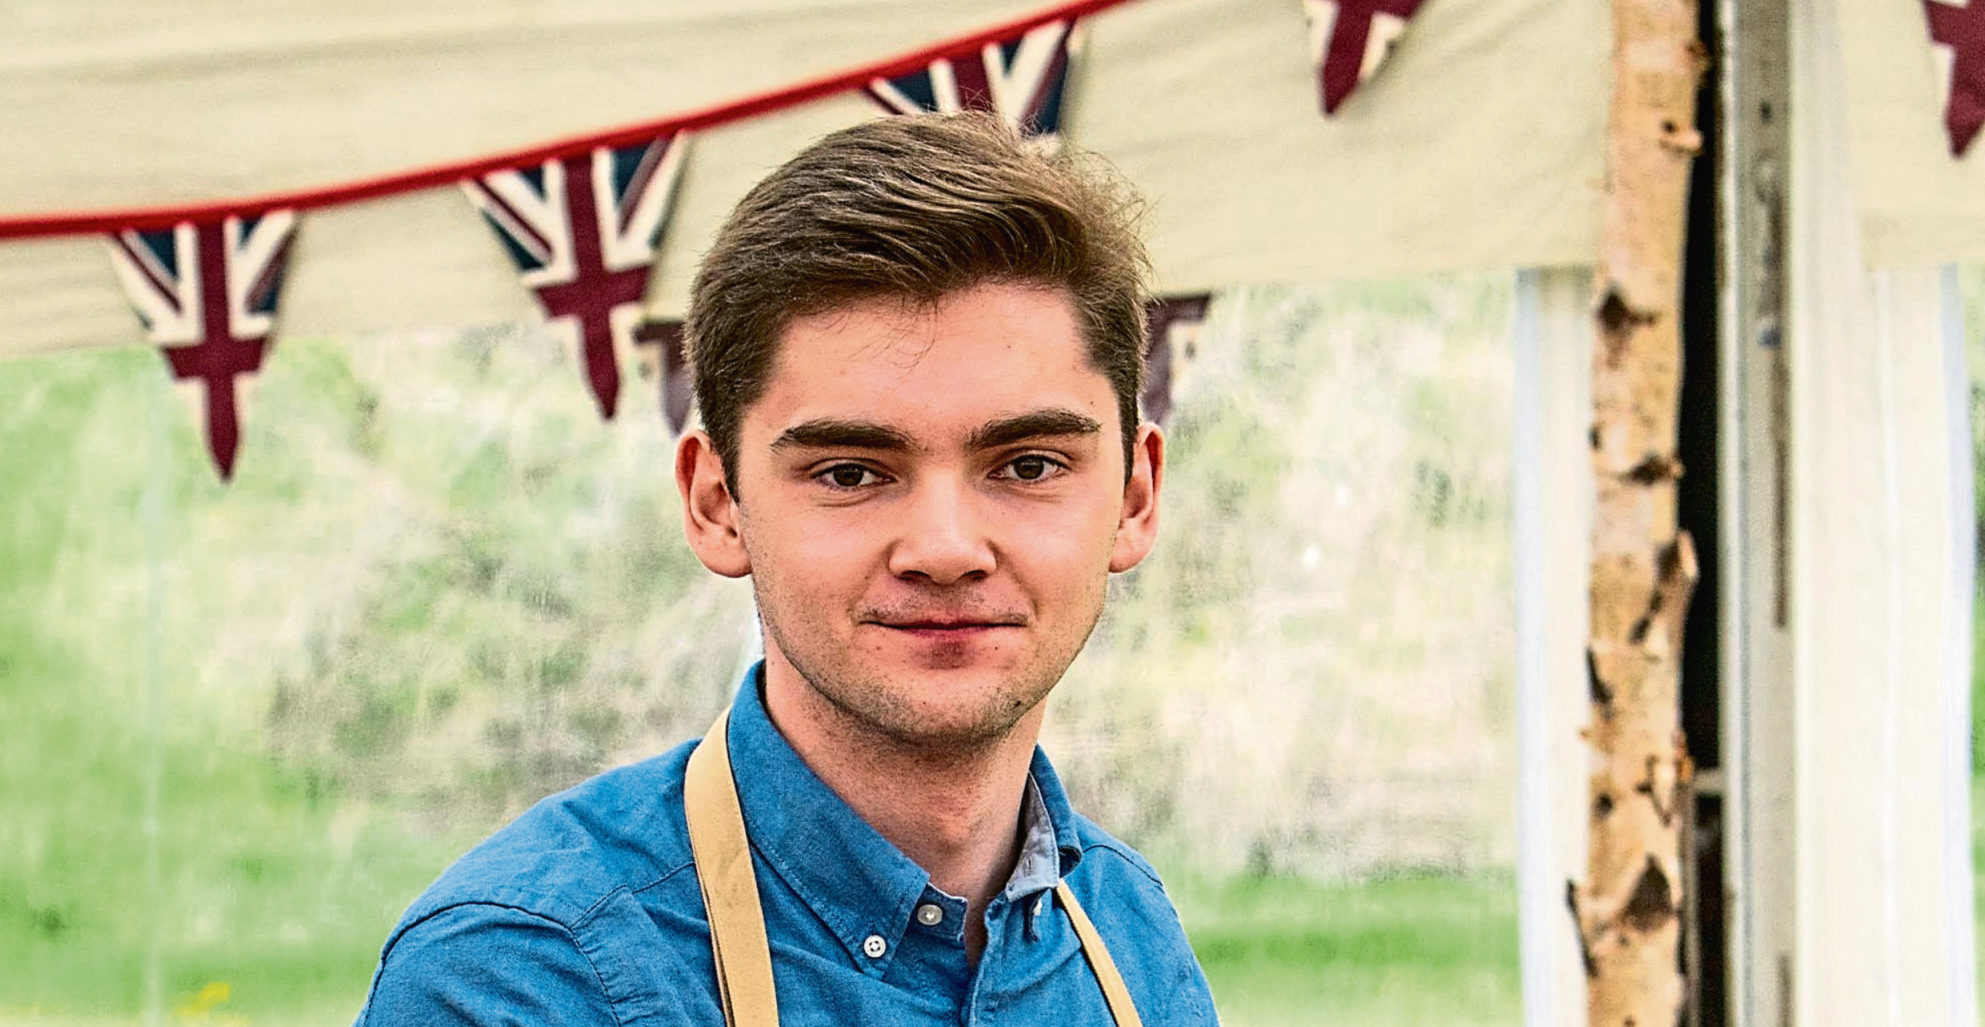 Henry from The Great British Bake Off 2019.